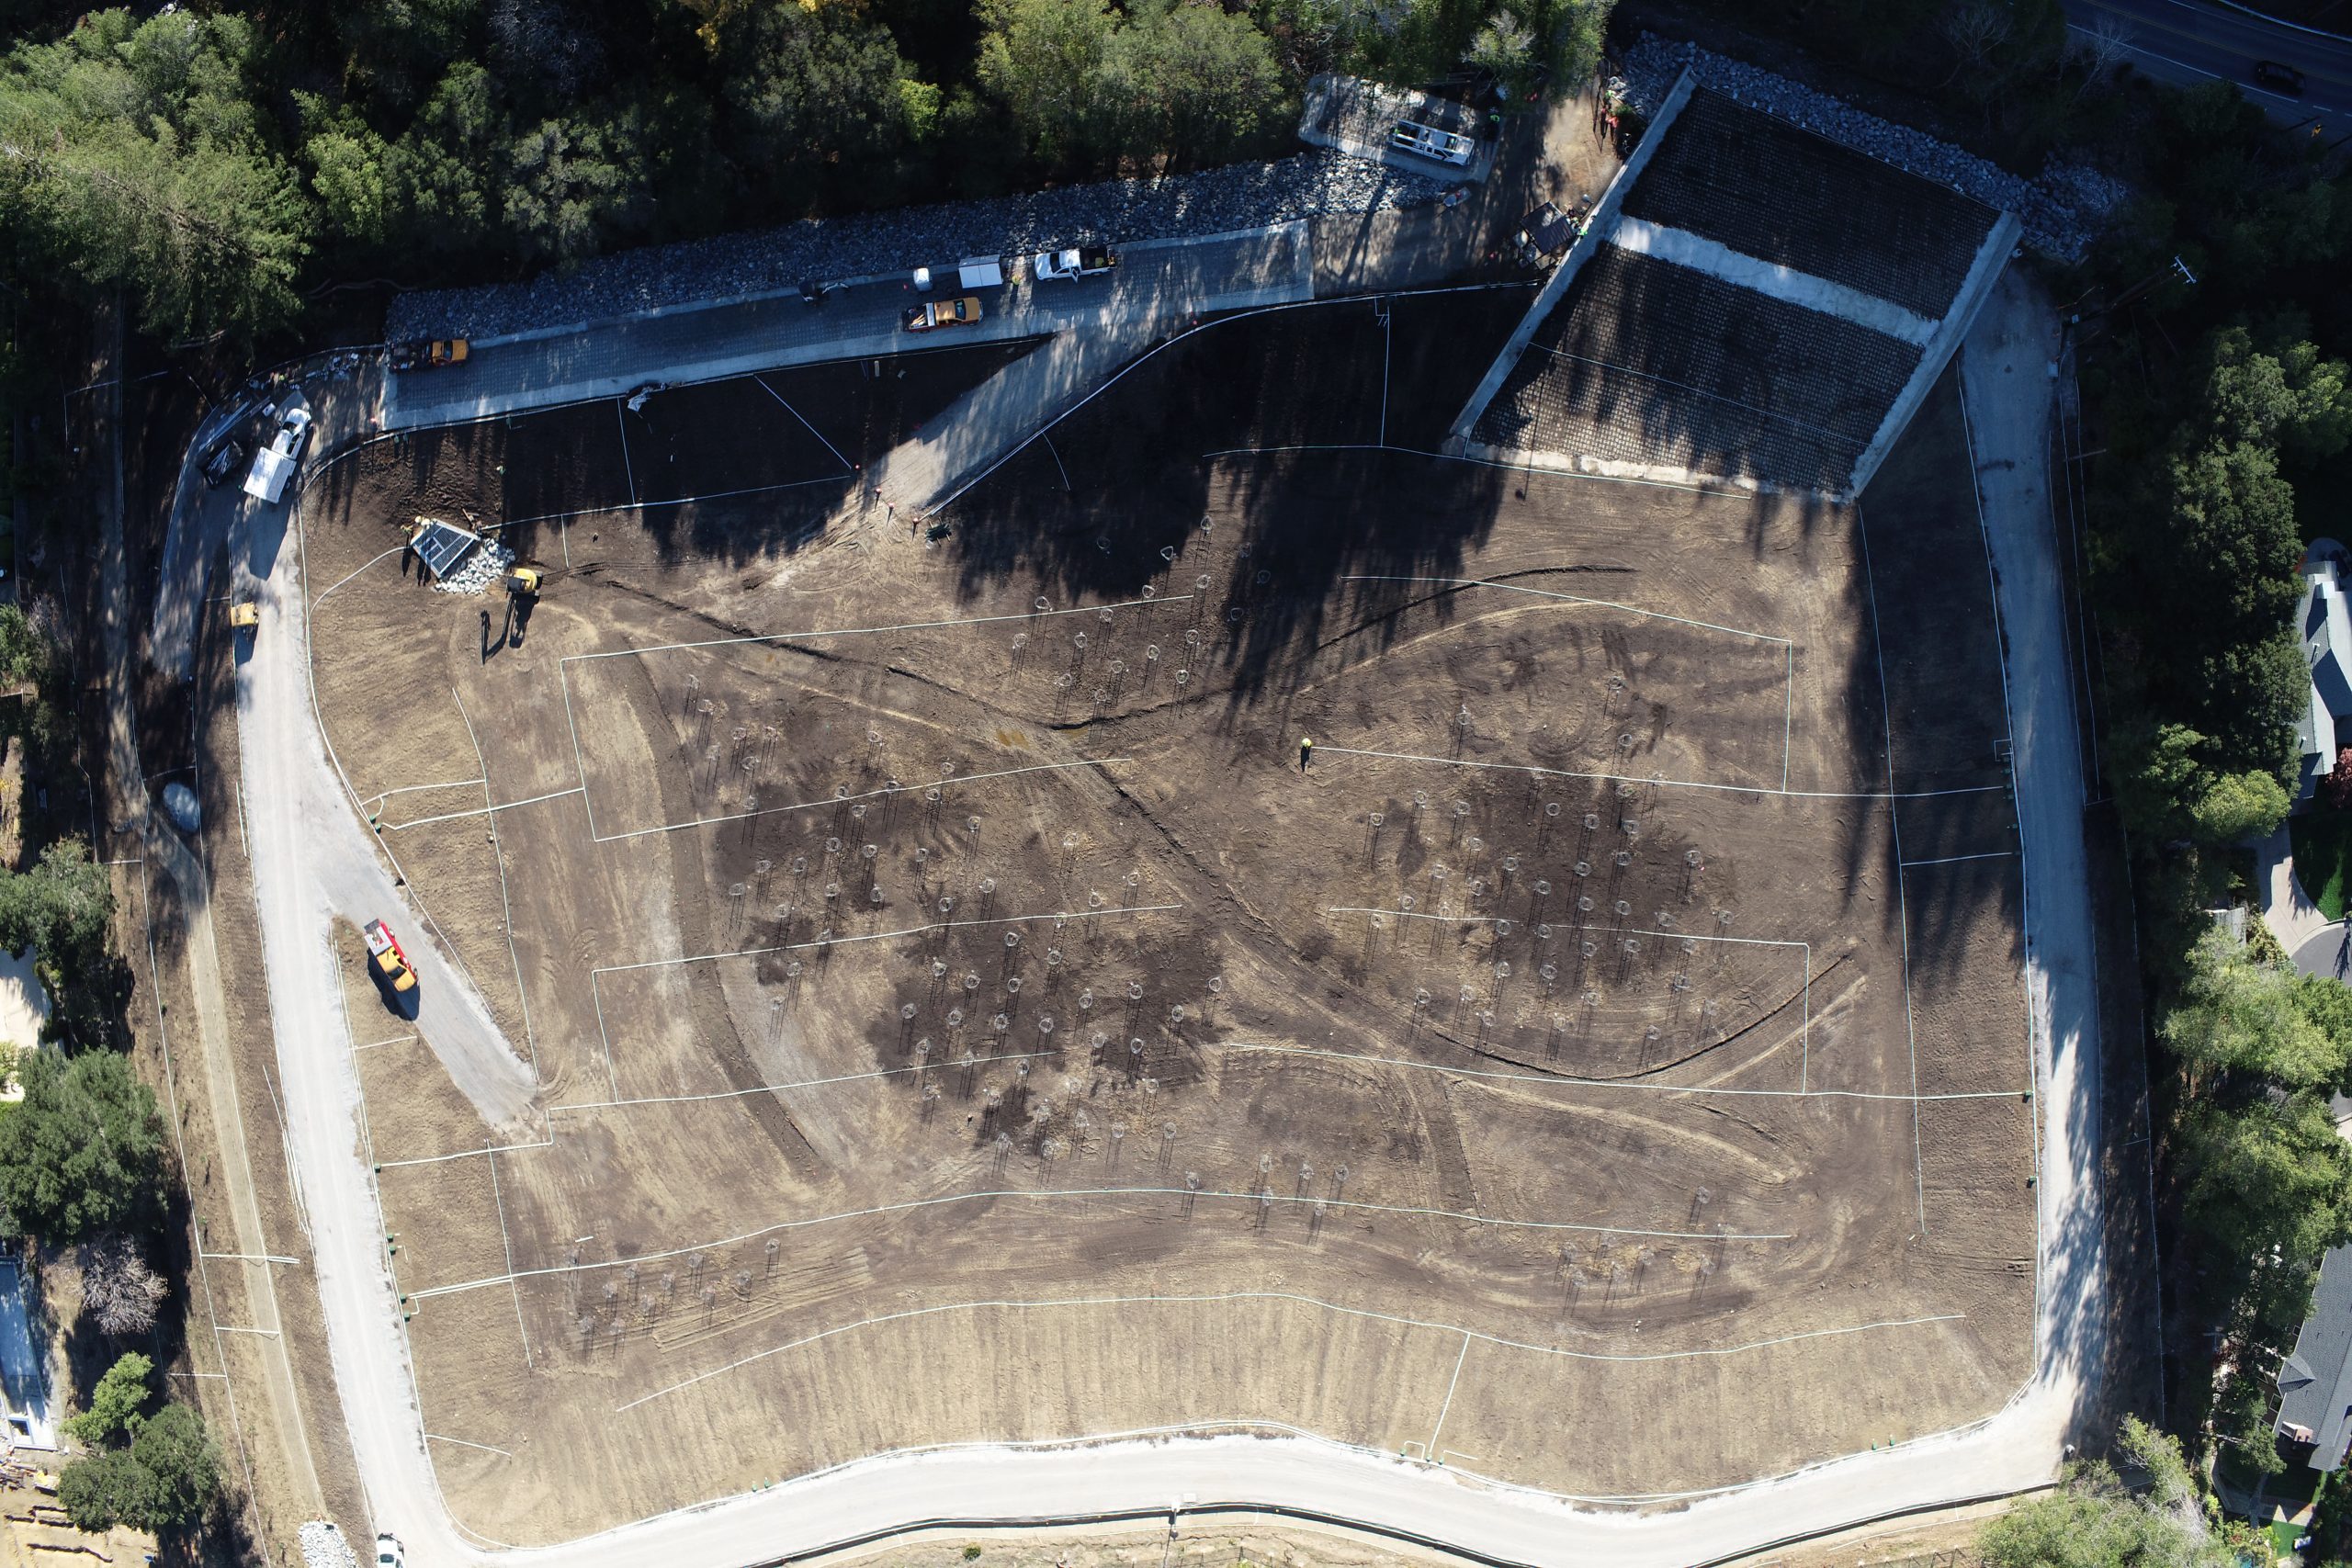 Aerial view of the current state of progress at the Sunnyside Flood Detention Basin Project, showing construction vehicles on a large area of dirt.